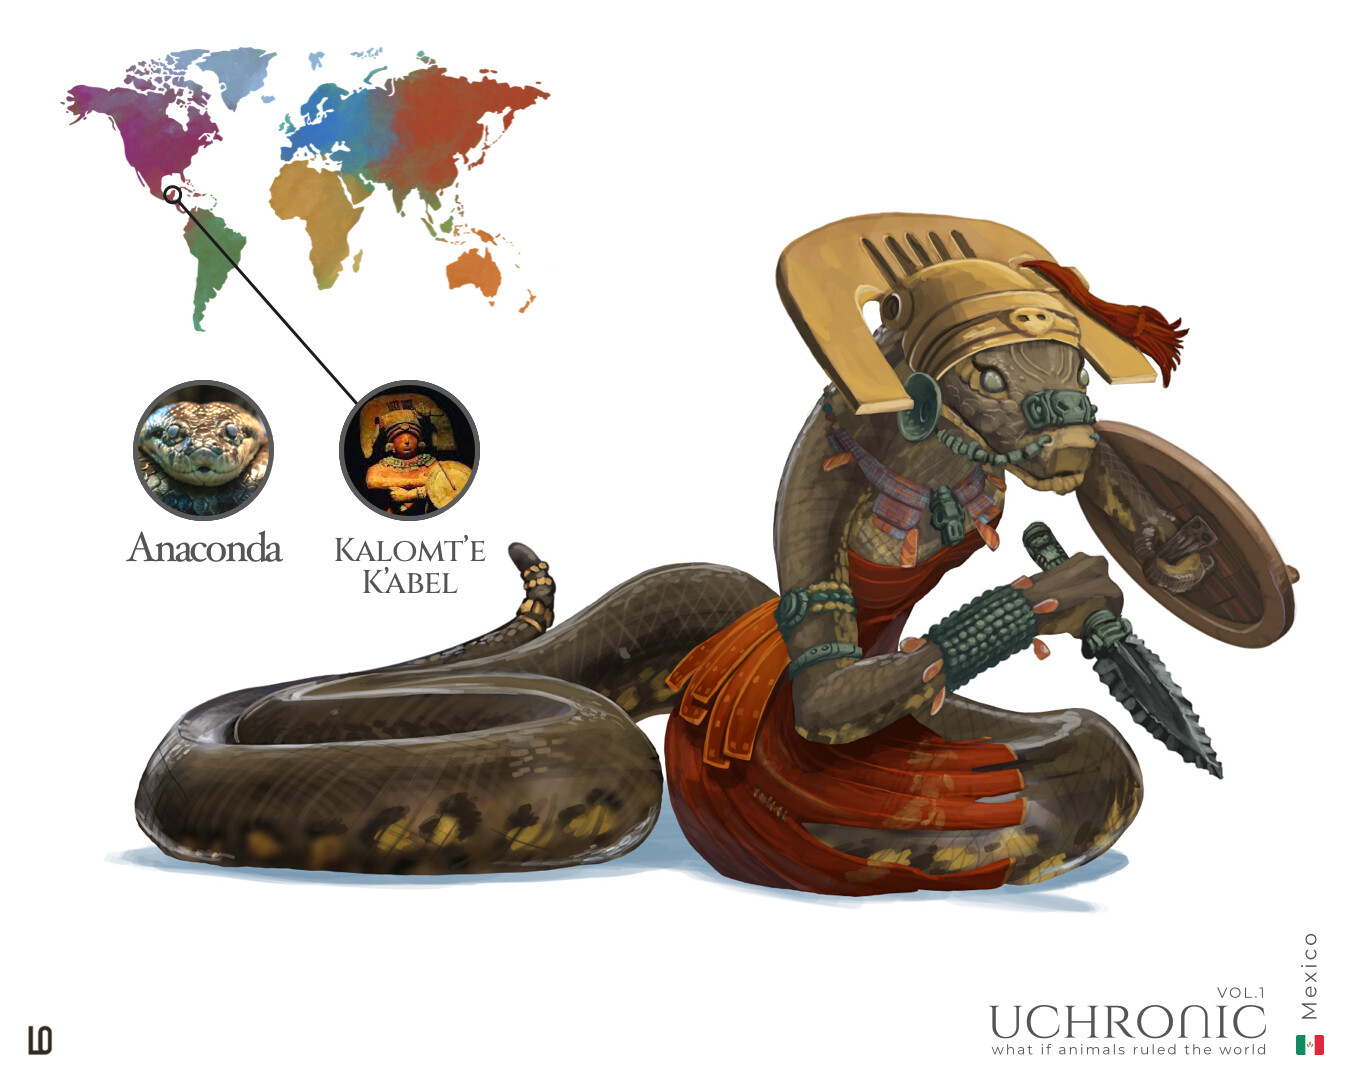 Kalomt’e K’abel , the great Mayan warrior from the Snake Dinasty, as an Anaconda (of course) I know that anacondas lives in Brazil, but looks cool!